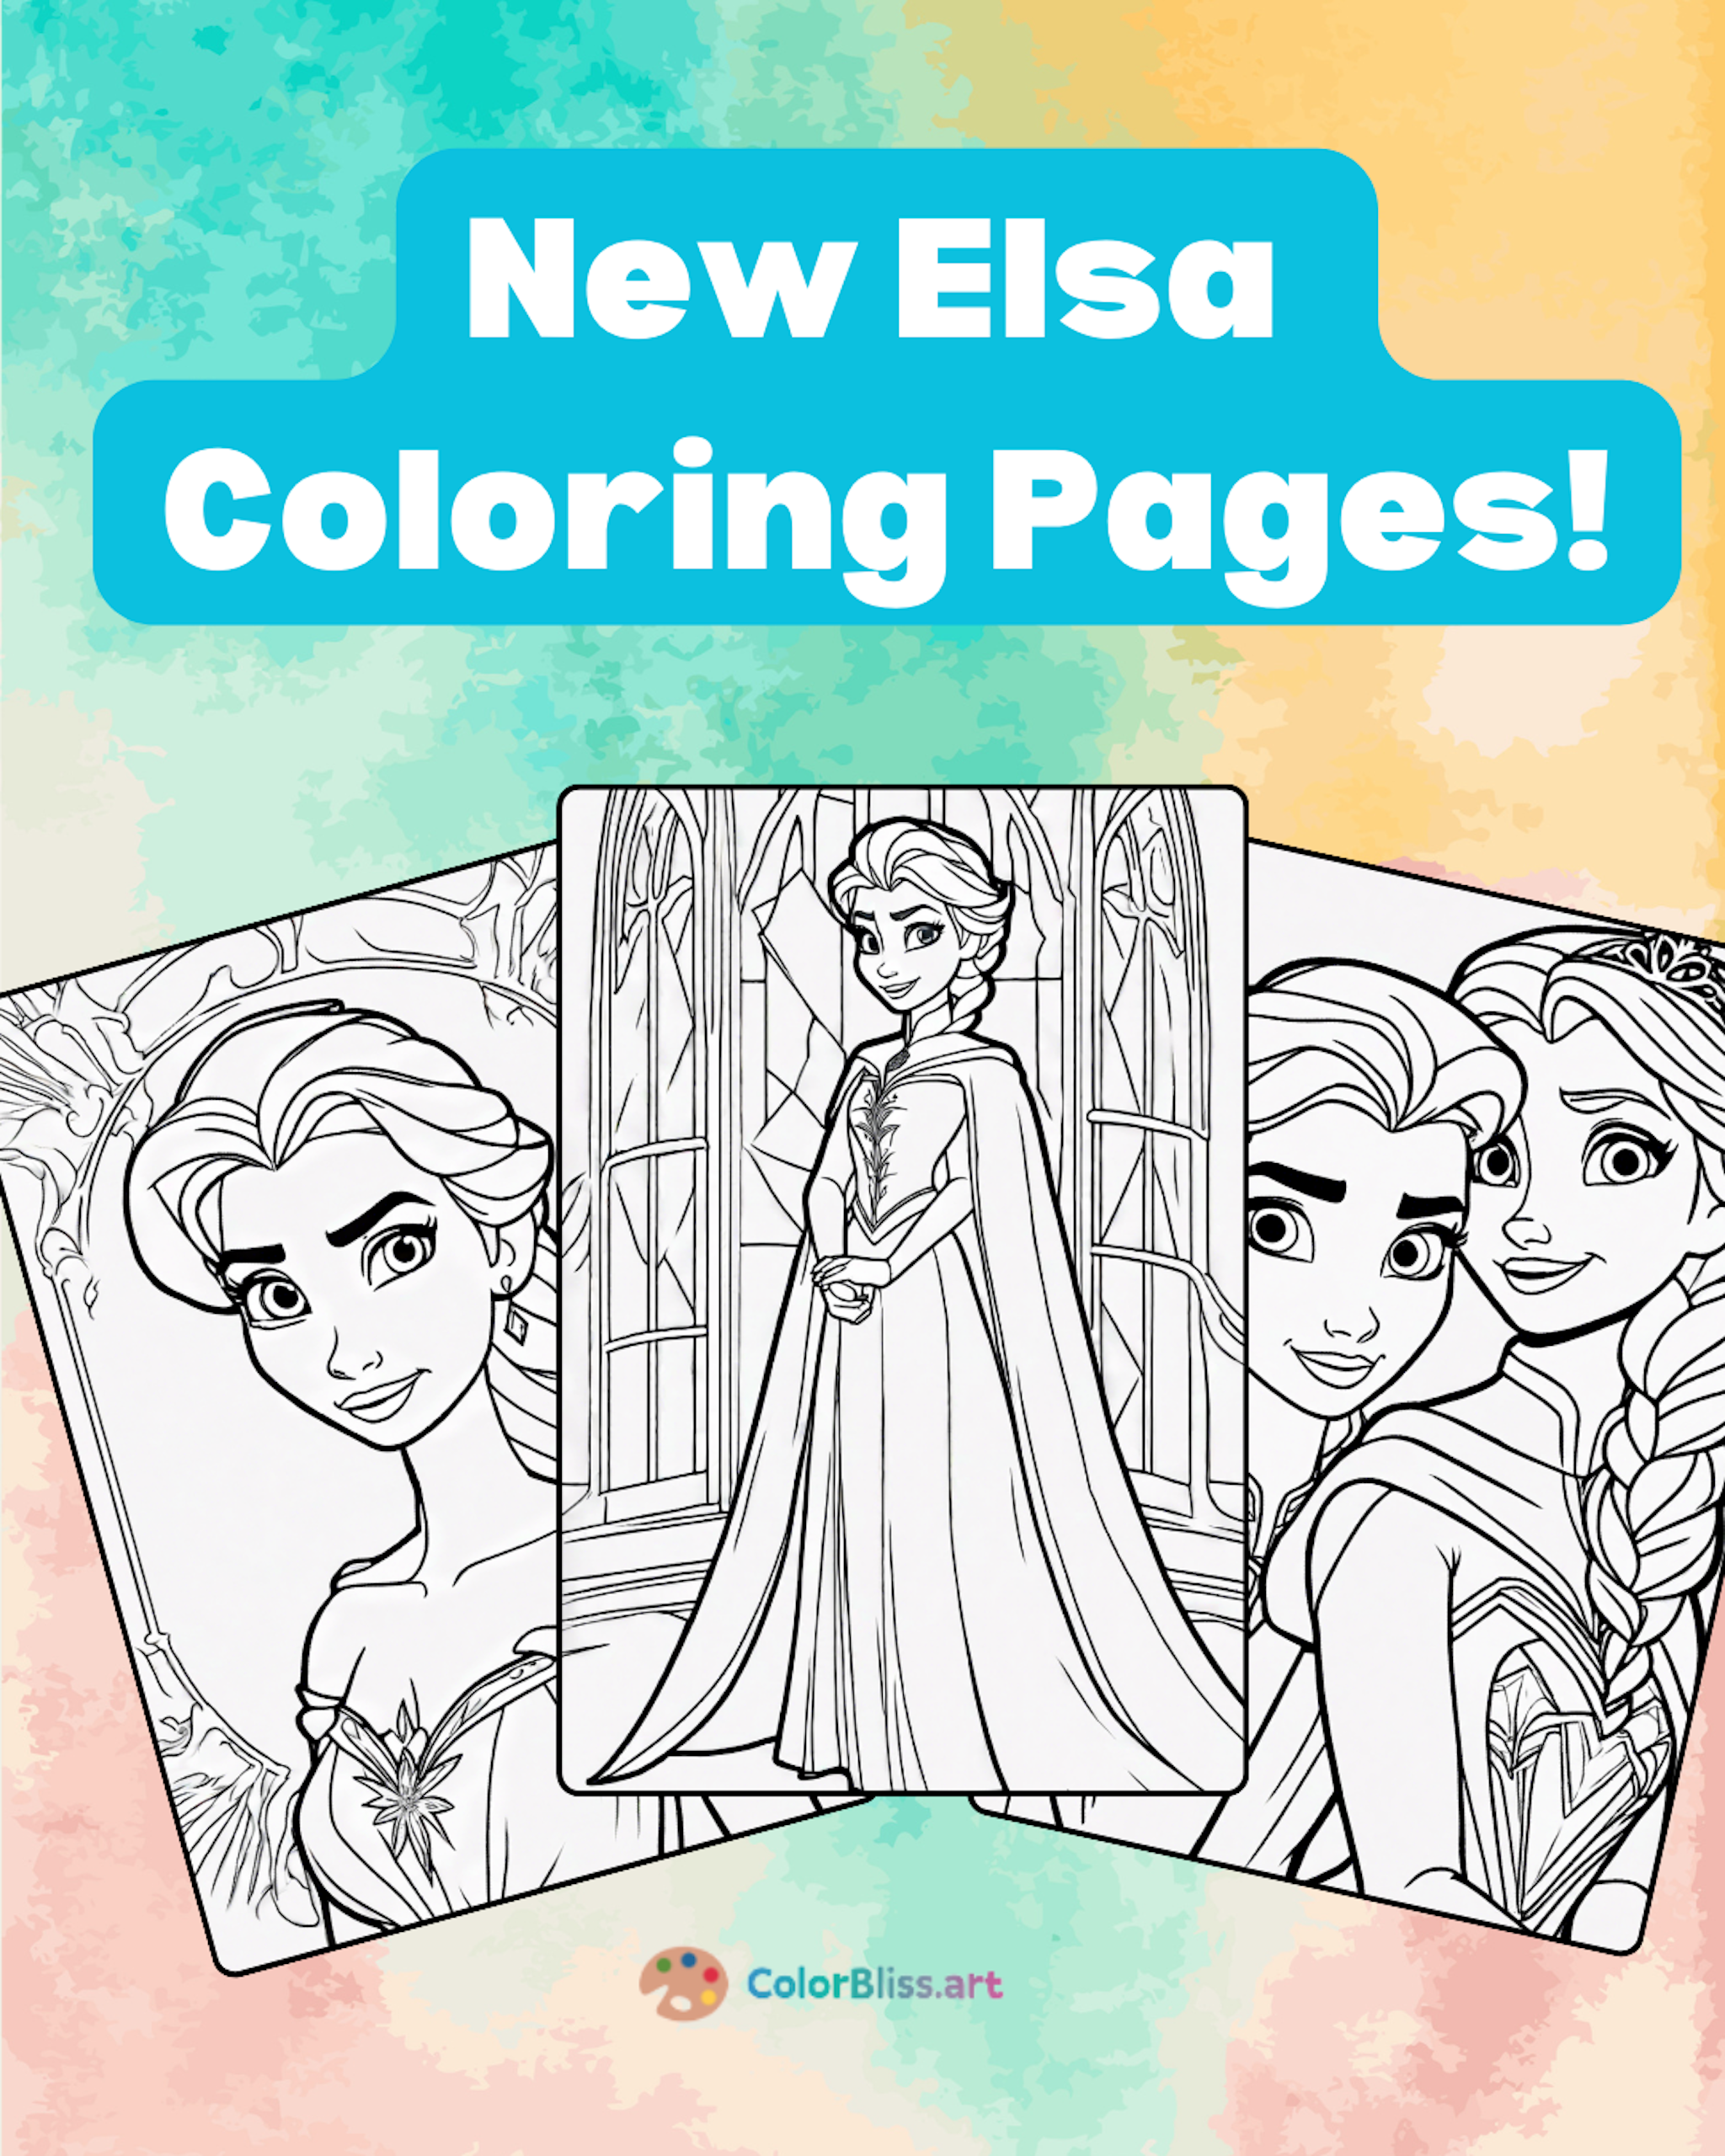 A coloring page for 6 Elsa coloring pages